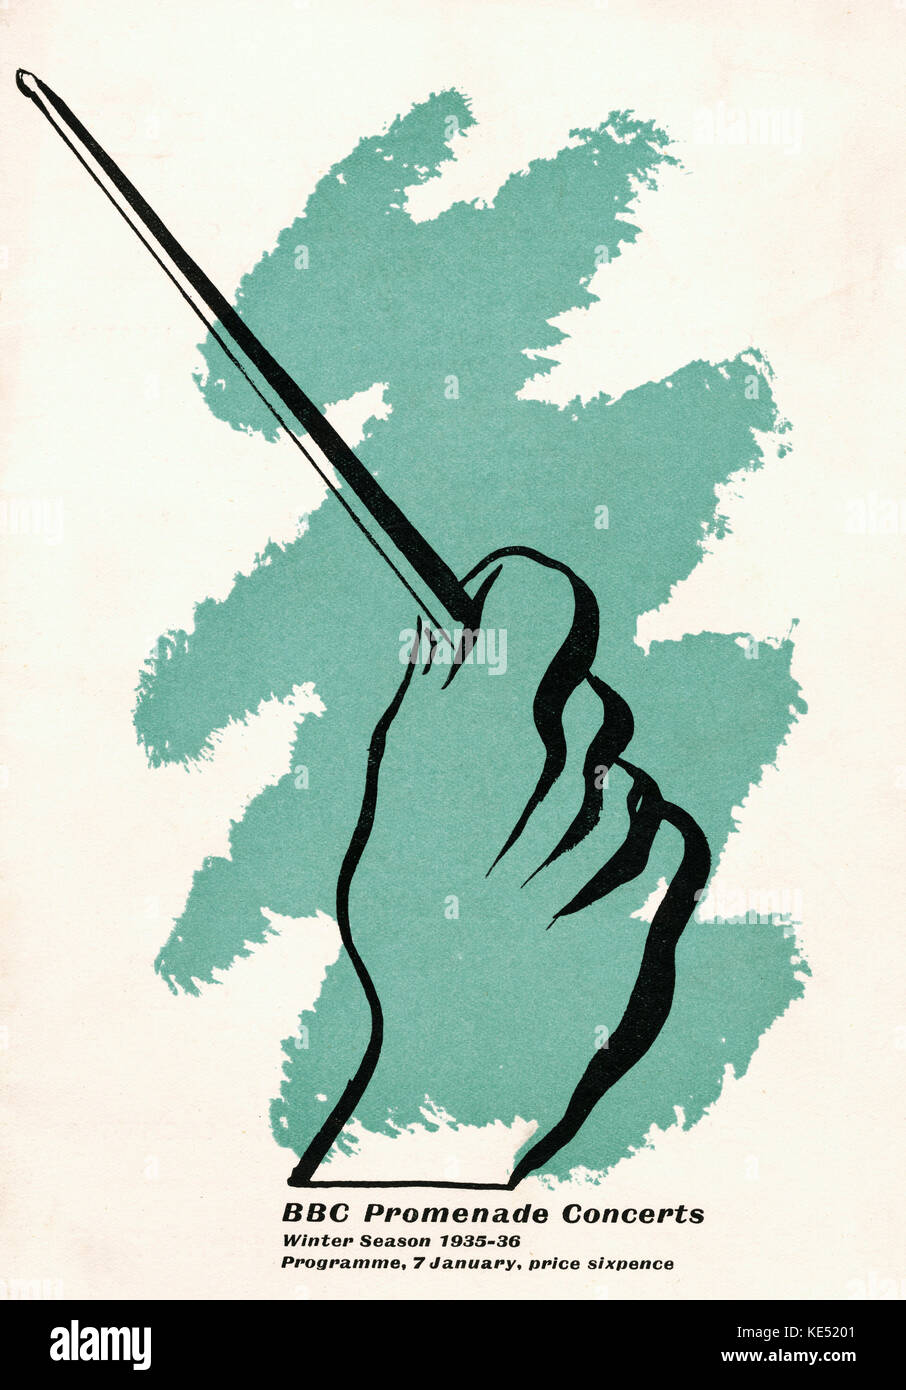 BBC Proms Programme,  7 January 1936. Illustration on front cover with hand holding a baton. Stock Photo